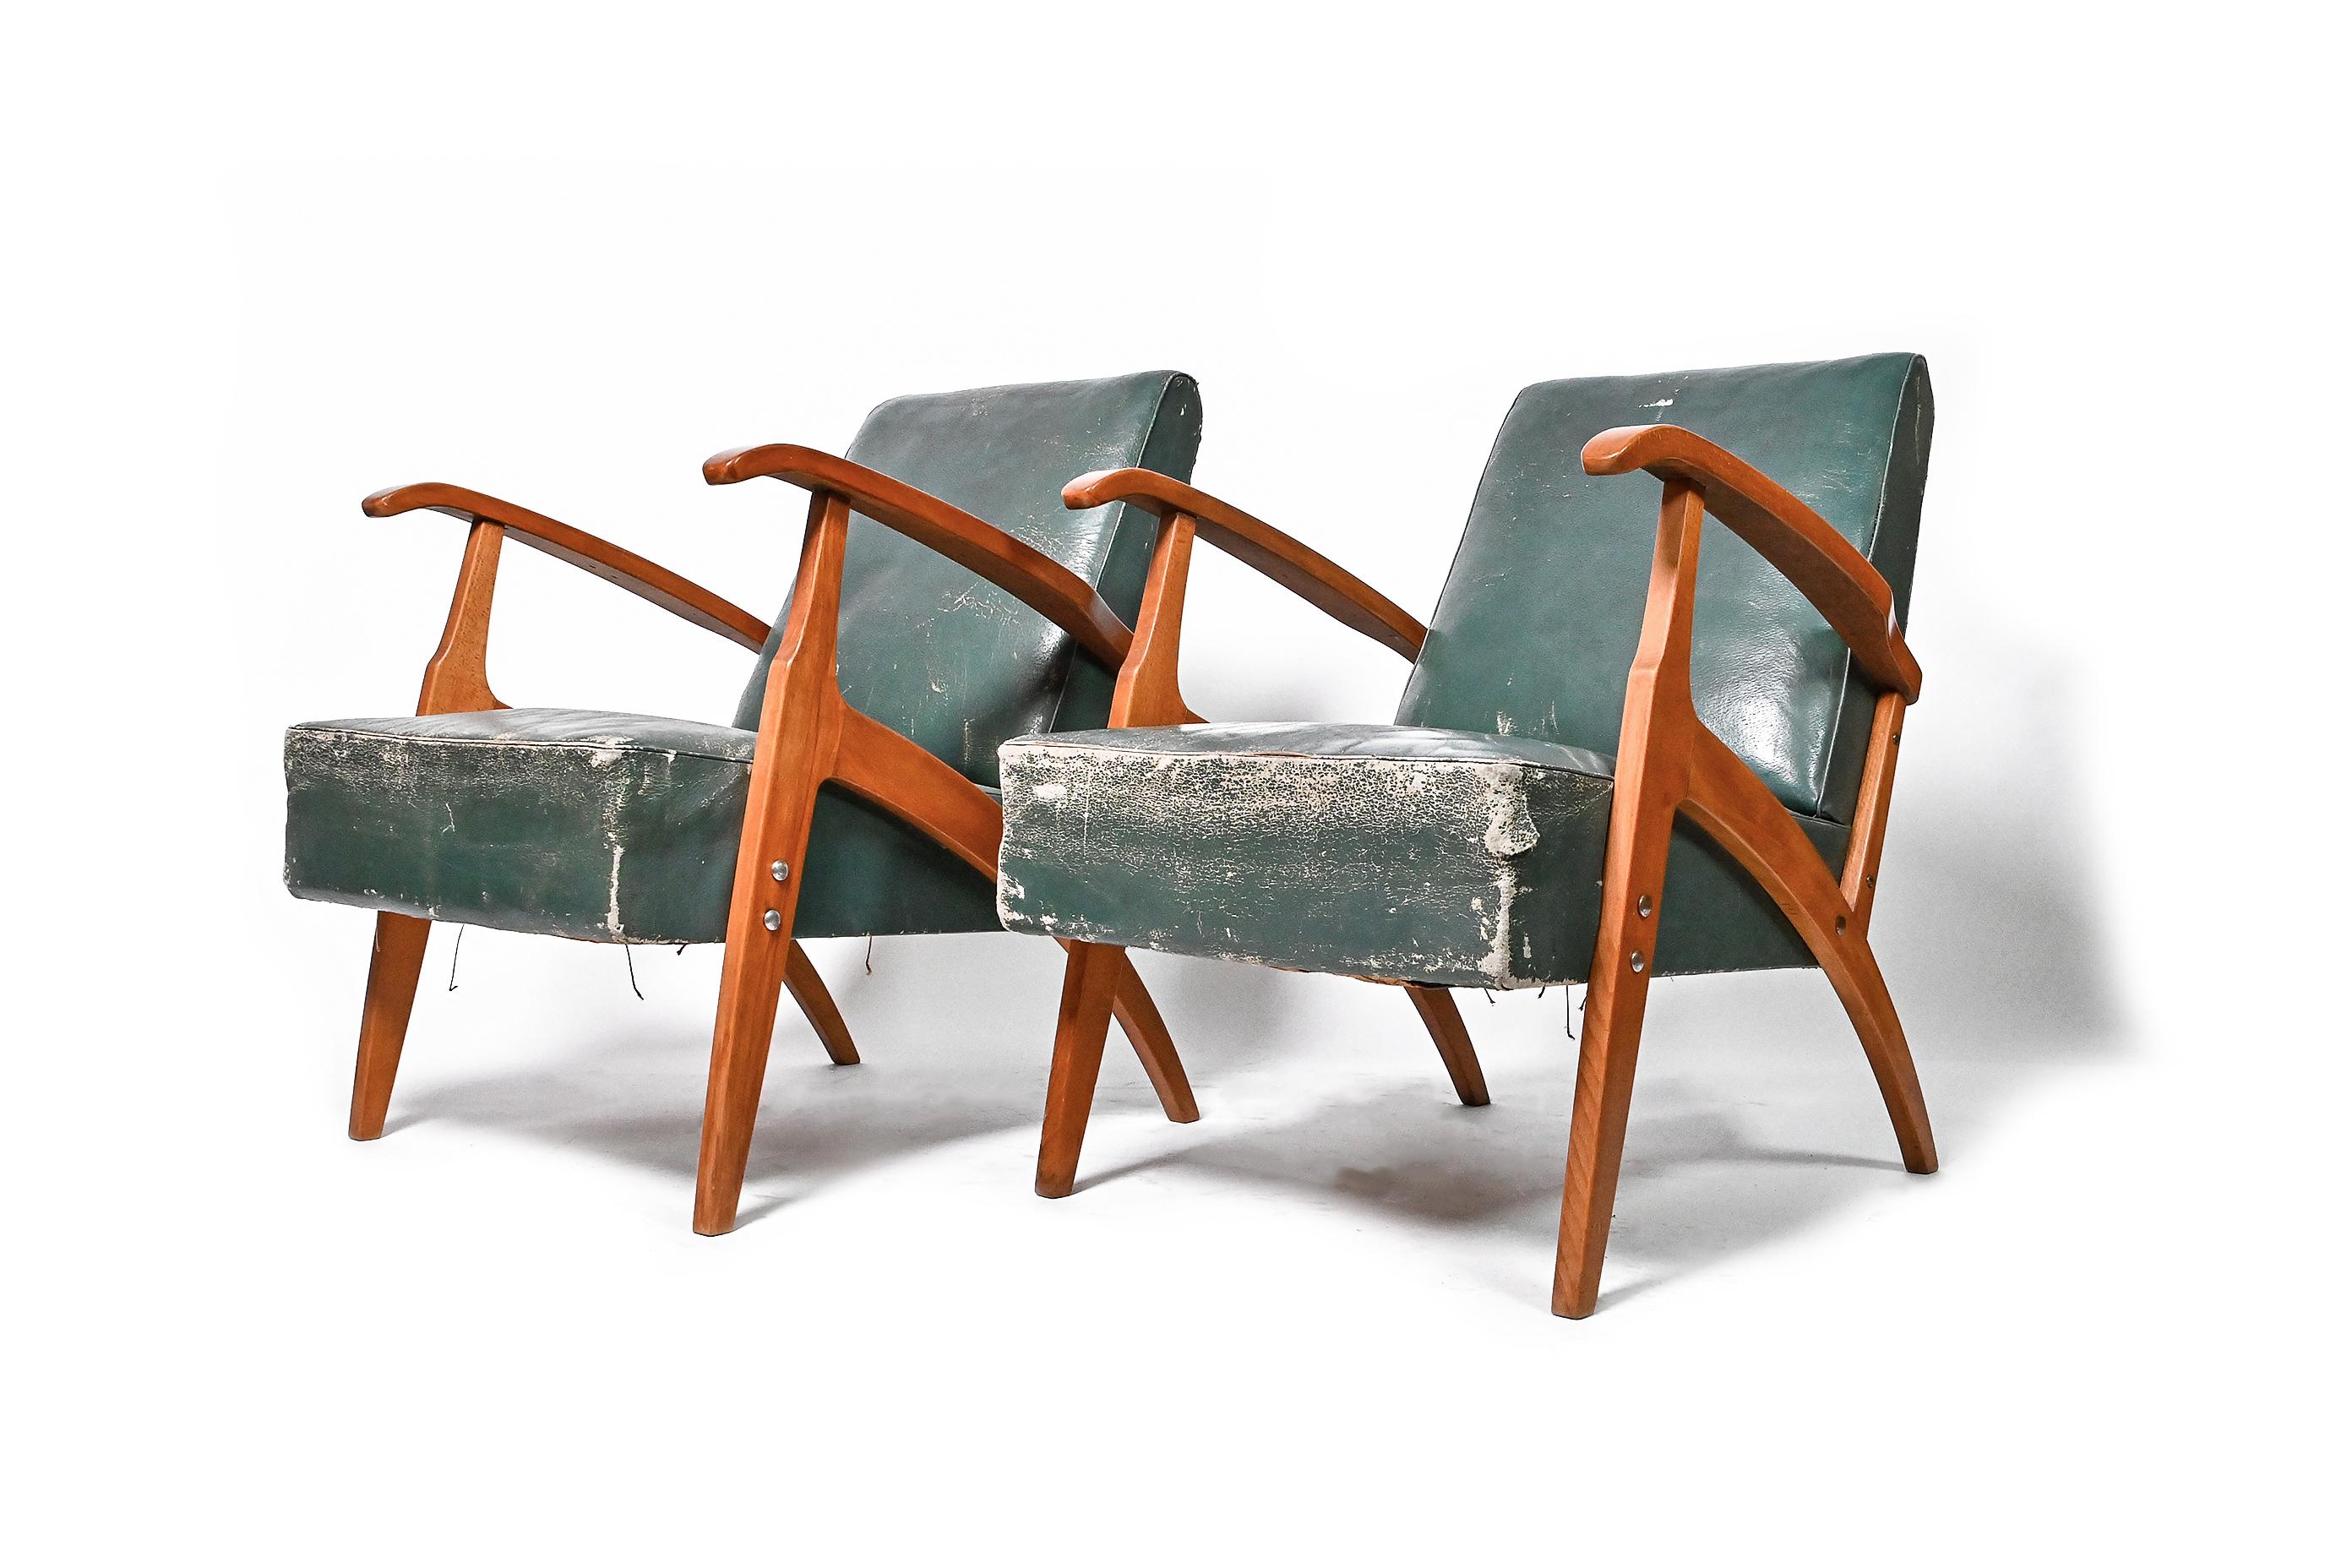 Hungarian Midcentury Green Leather Armchairs, Hungary, 1950s For Sale